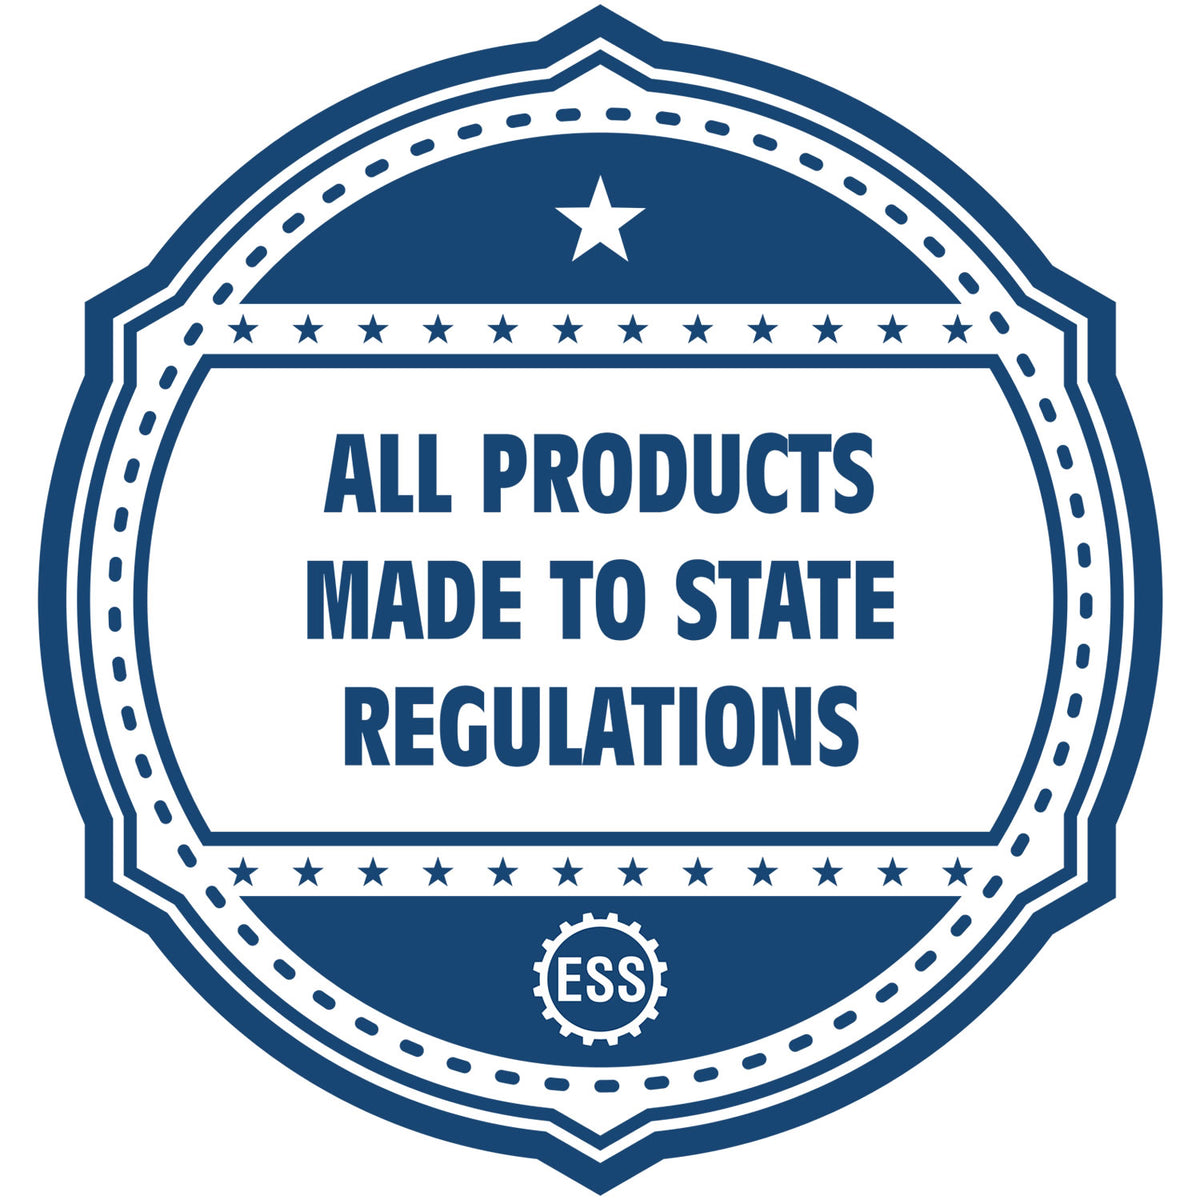 An icon or badge element for the Premium MaxLight Pre-Inked Nevada Engineering Stamp showing that this product is made in compliance with state regulations.